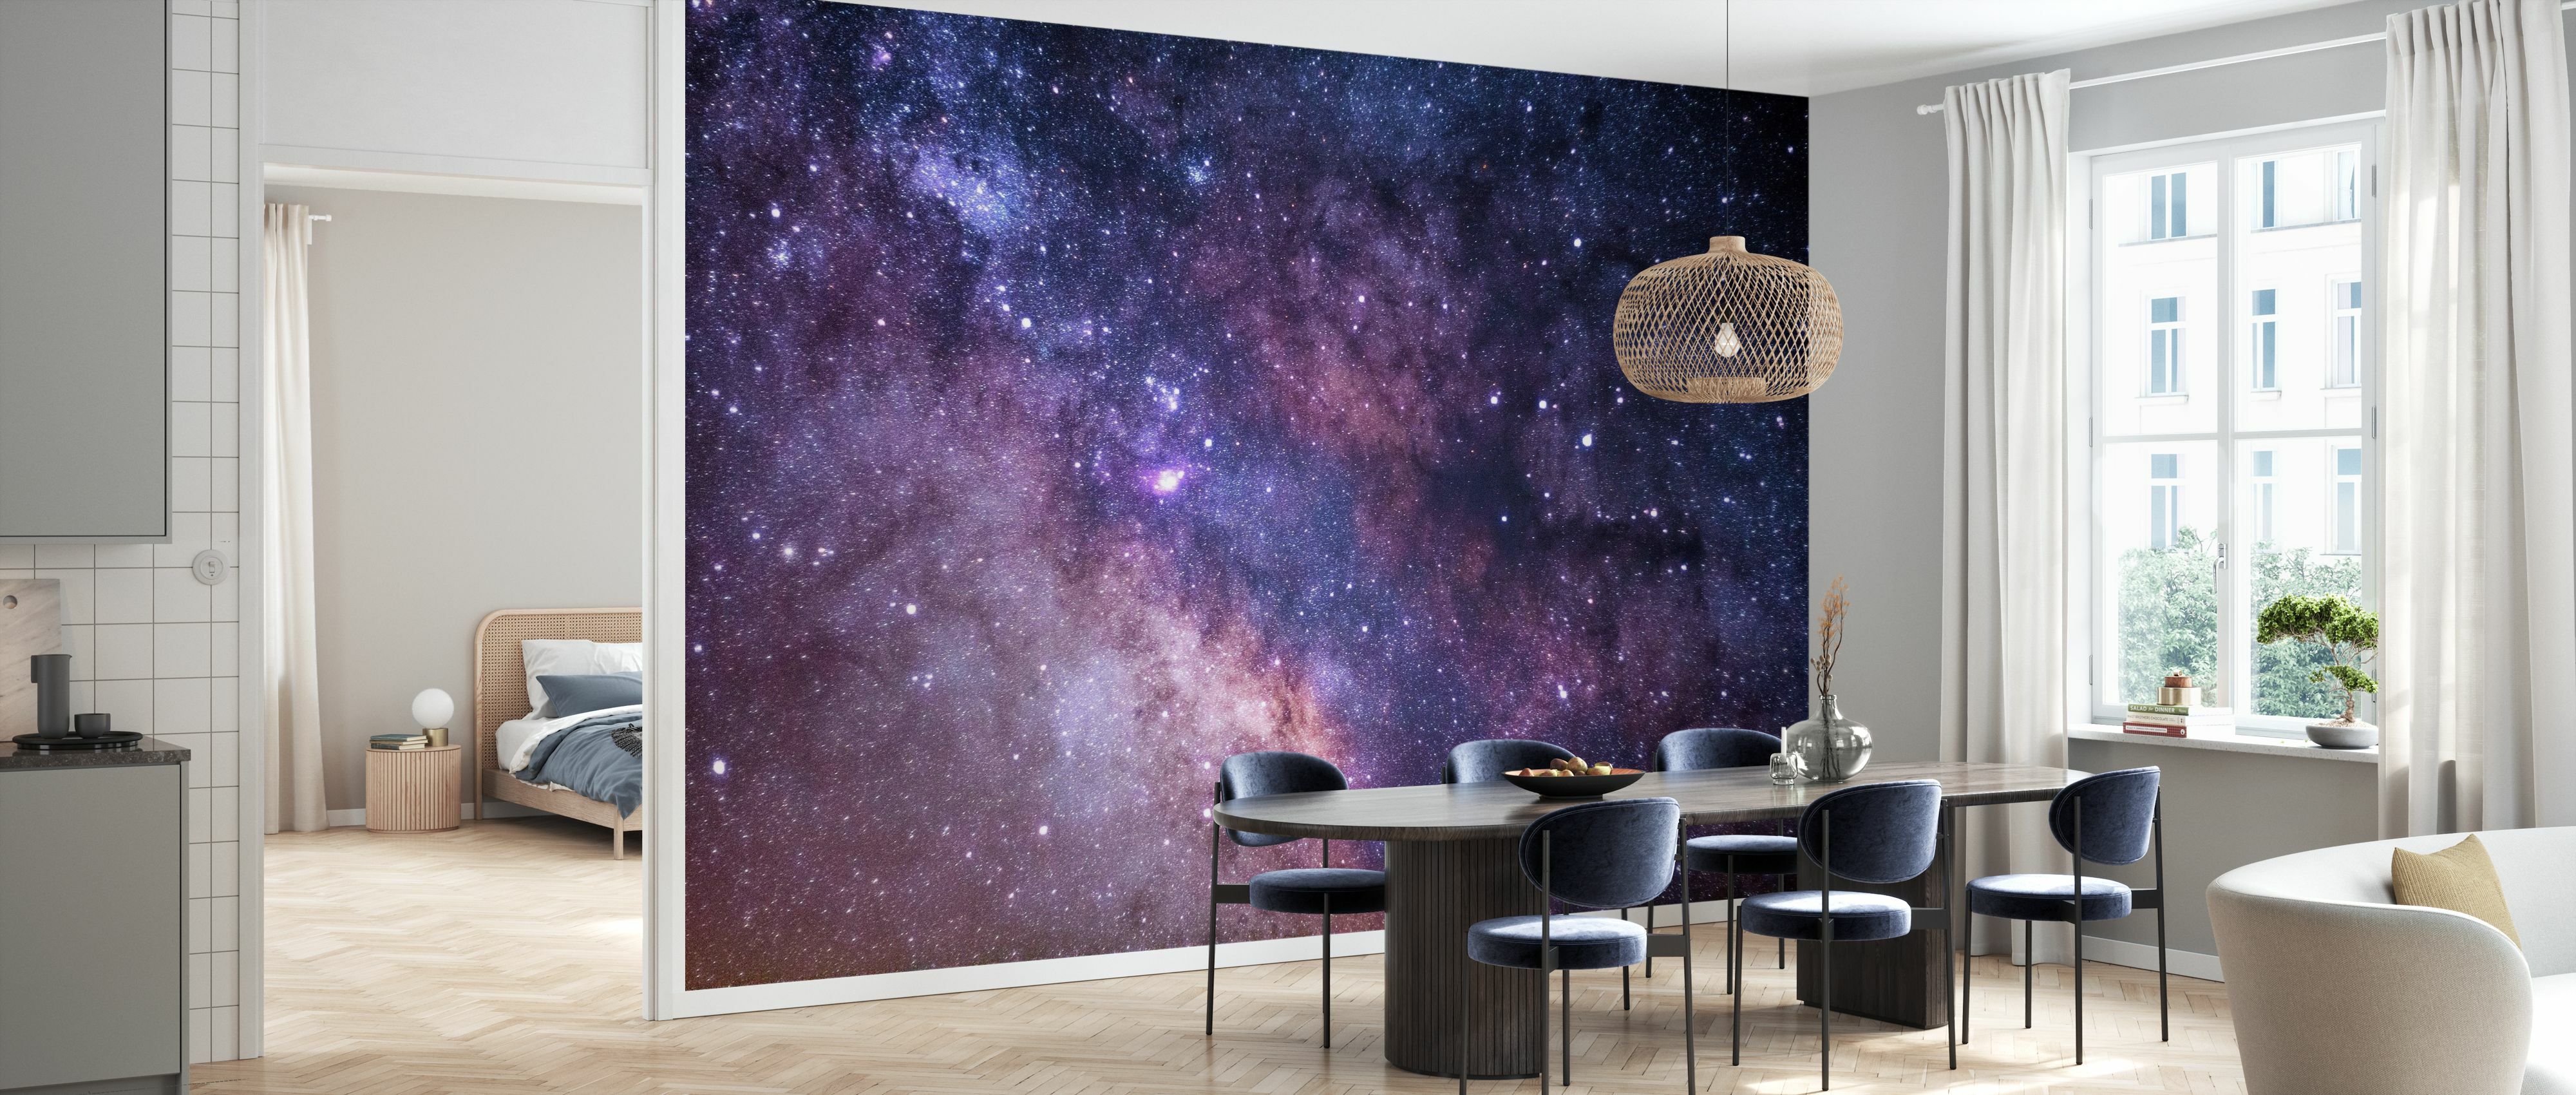 Alien Planet Star System in Space Wallpaper Mural Photo 44956041 budget paper 